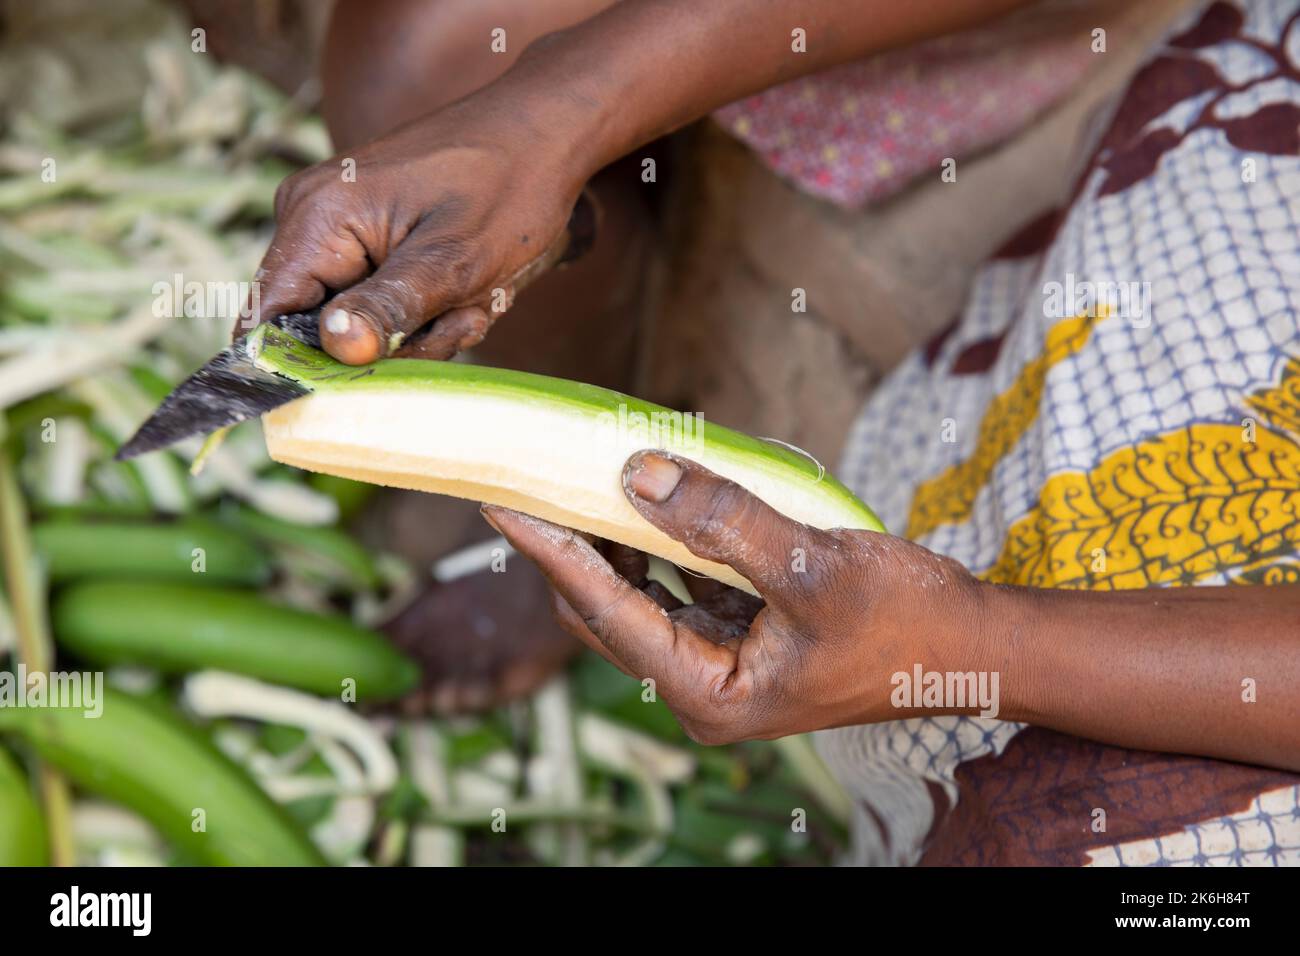 The East African Highland Banana, a starchy savory banana known locally as matoke, is a staple food in central and western Uganda, East Africa. Stock Photo